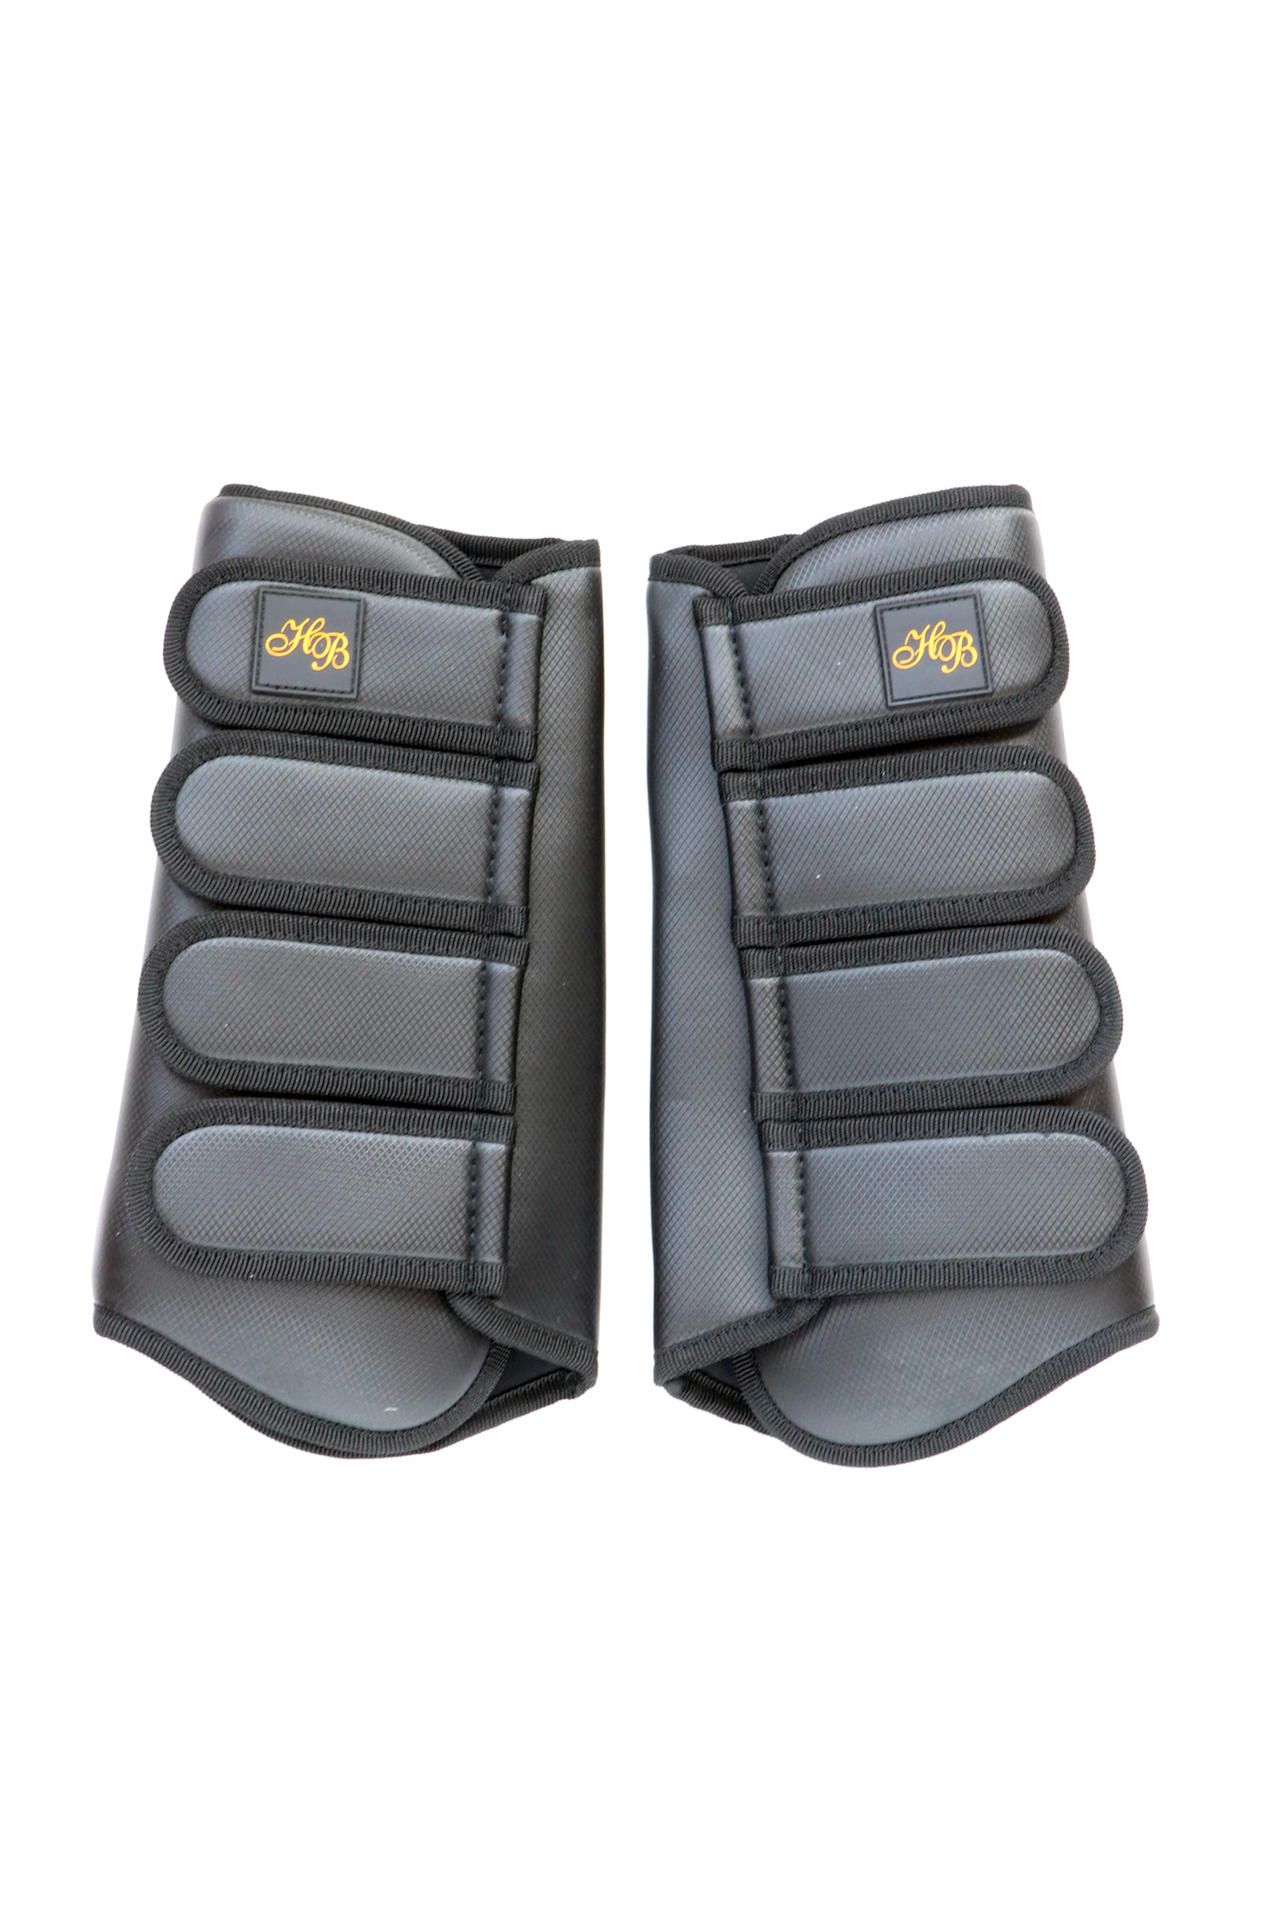 207 Comfort tendon protection  boot hind legs foot protection